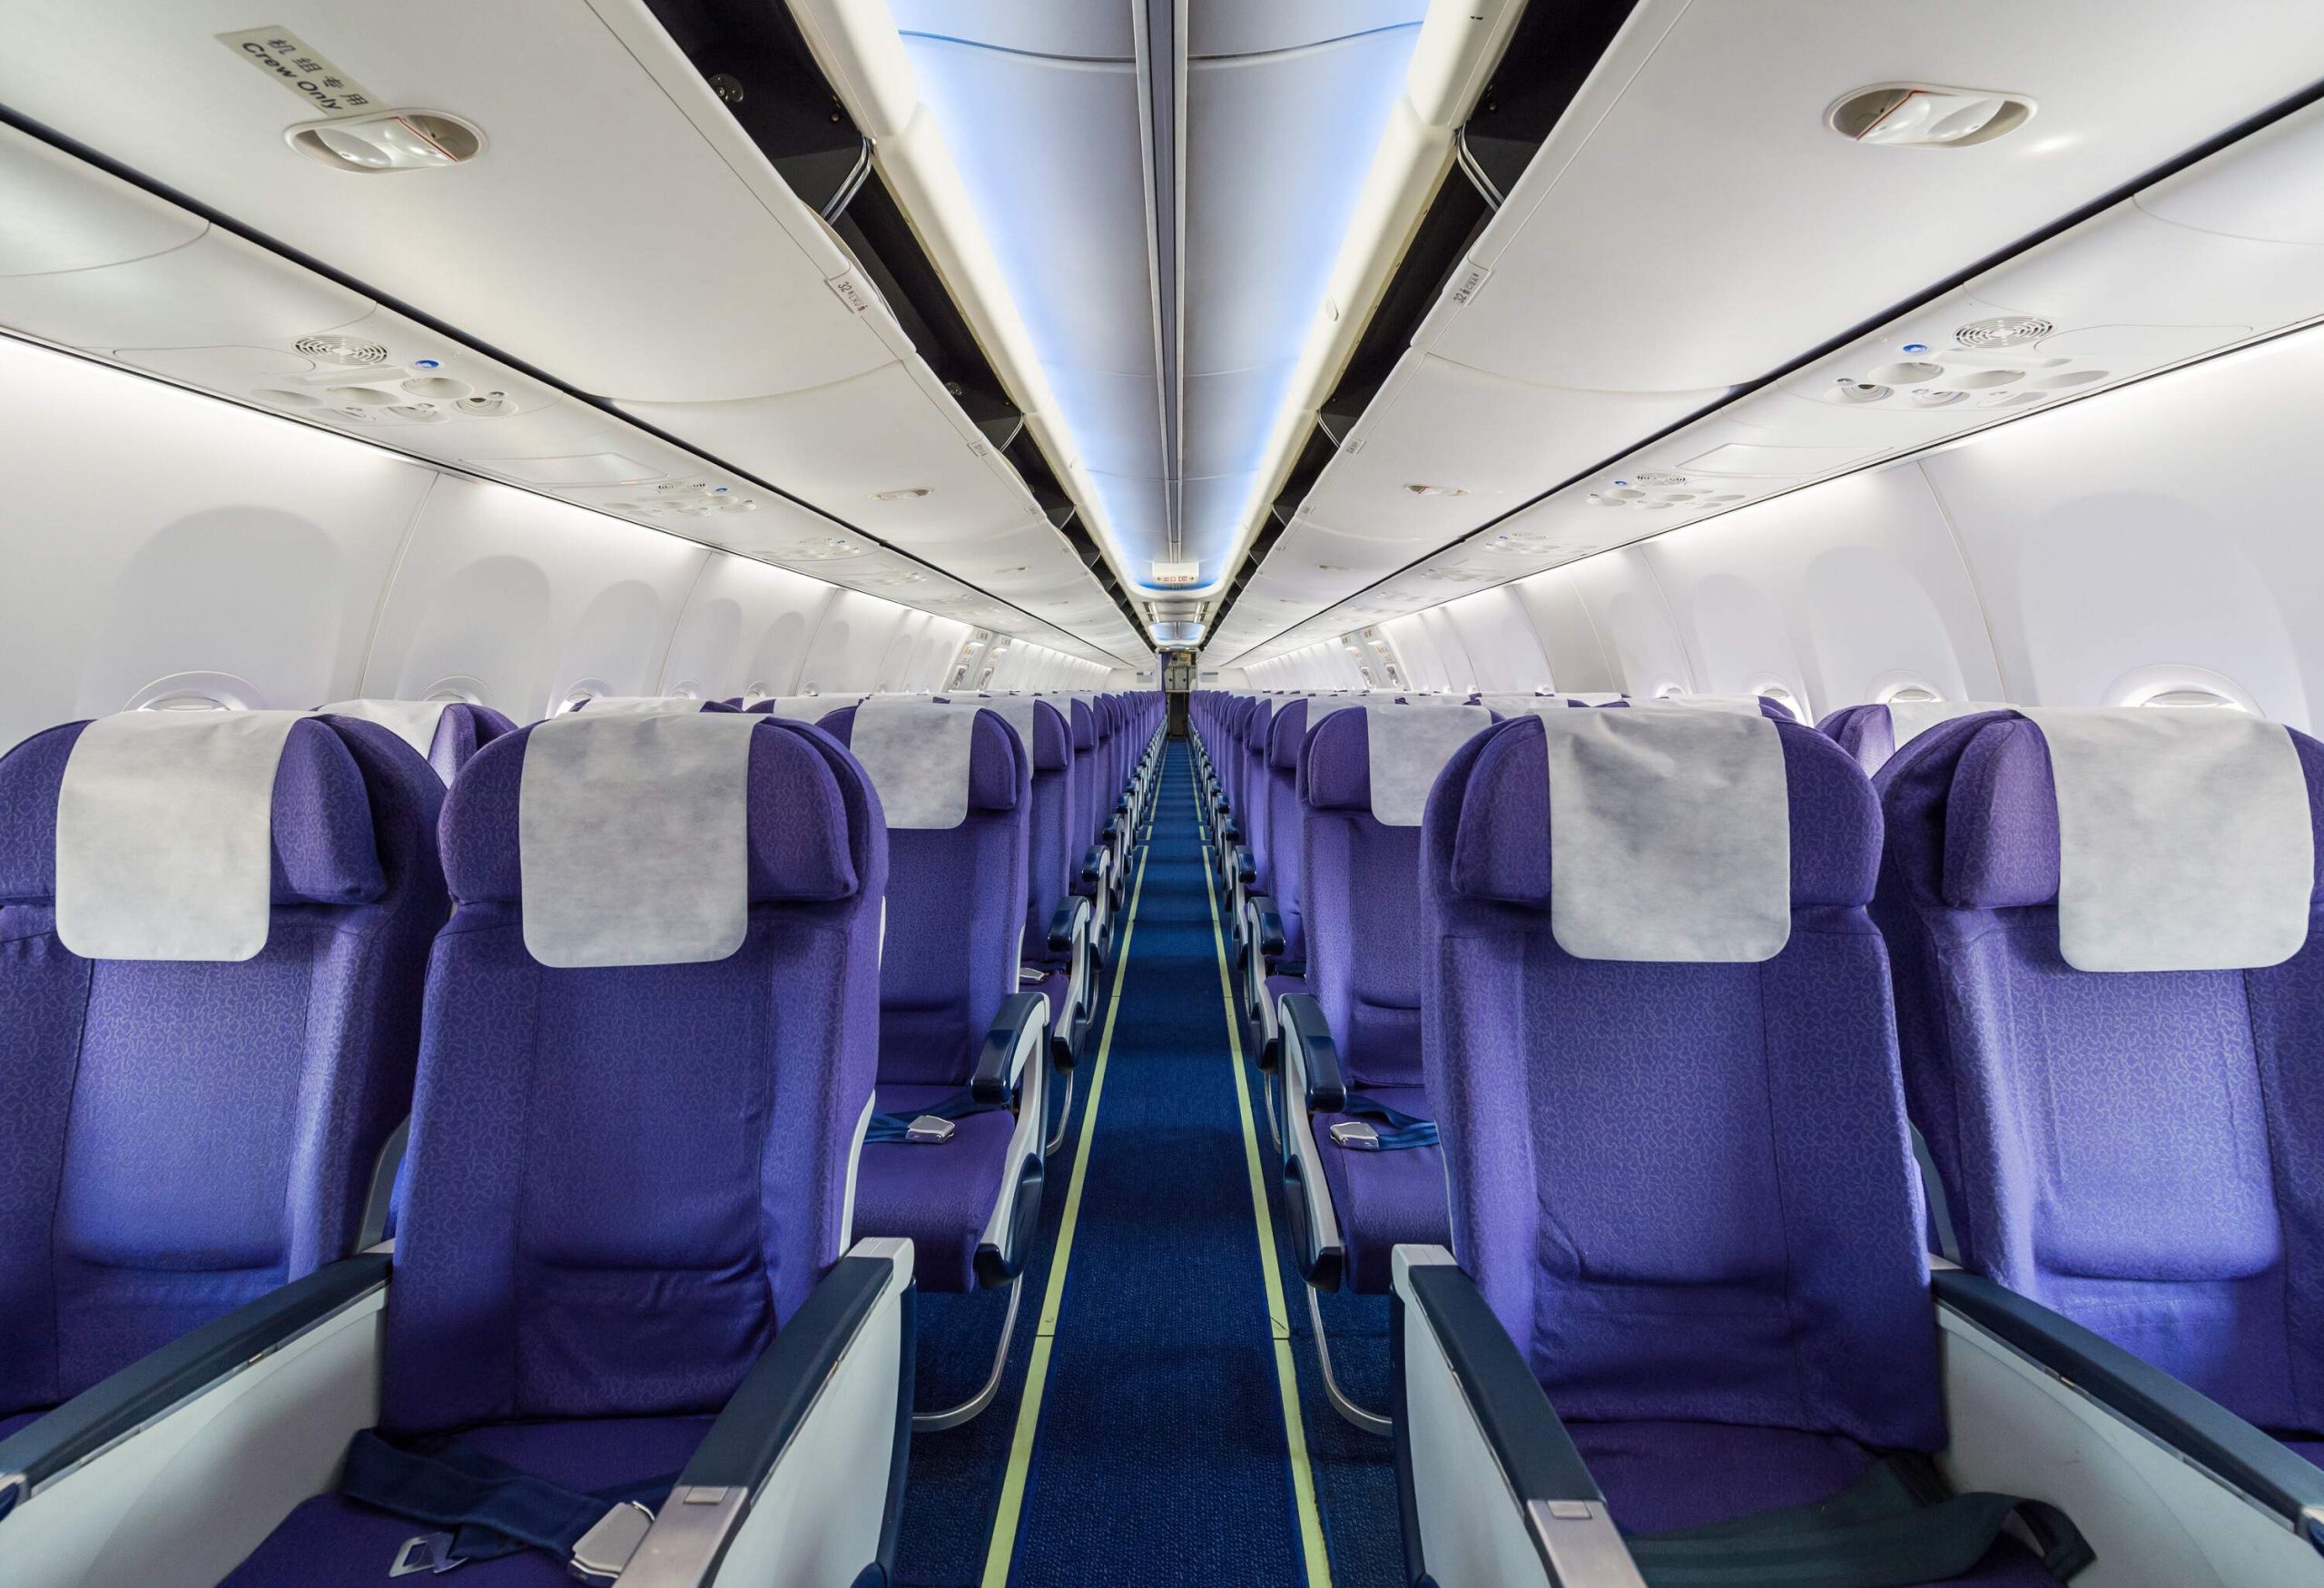 A cleaned out passenger aircraft with vacant purple seats.